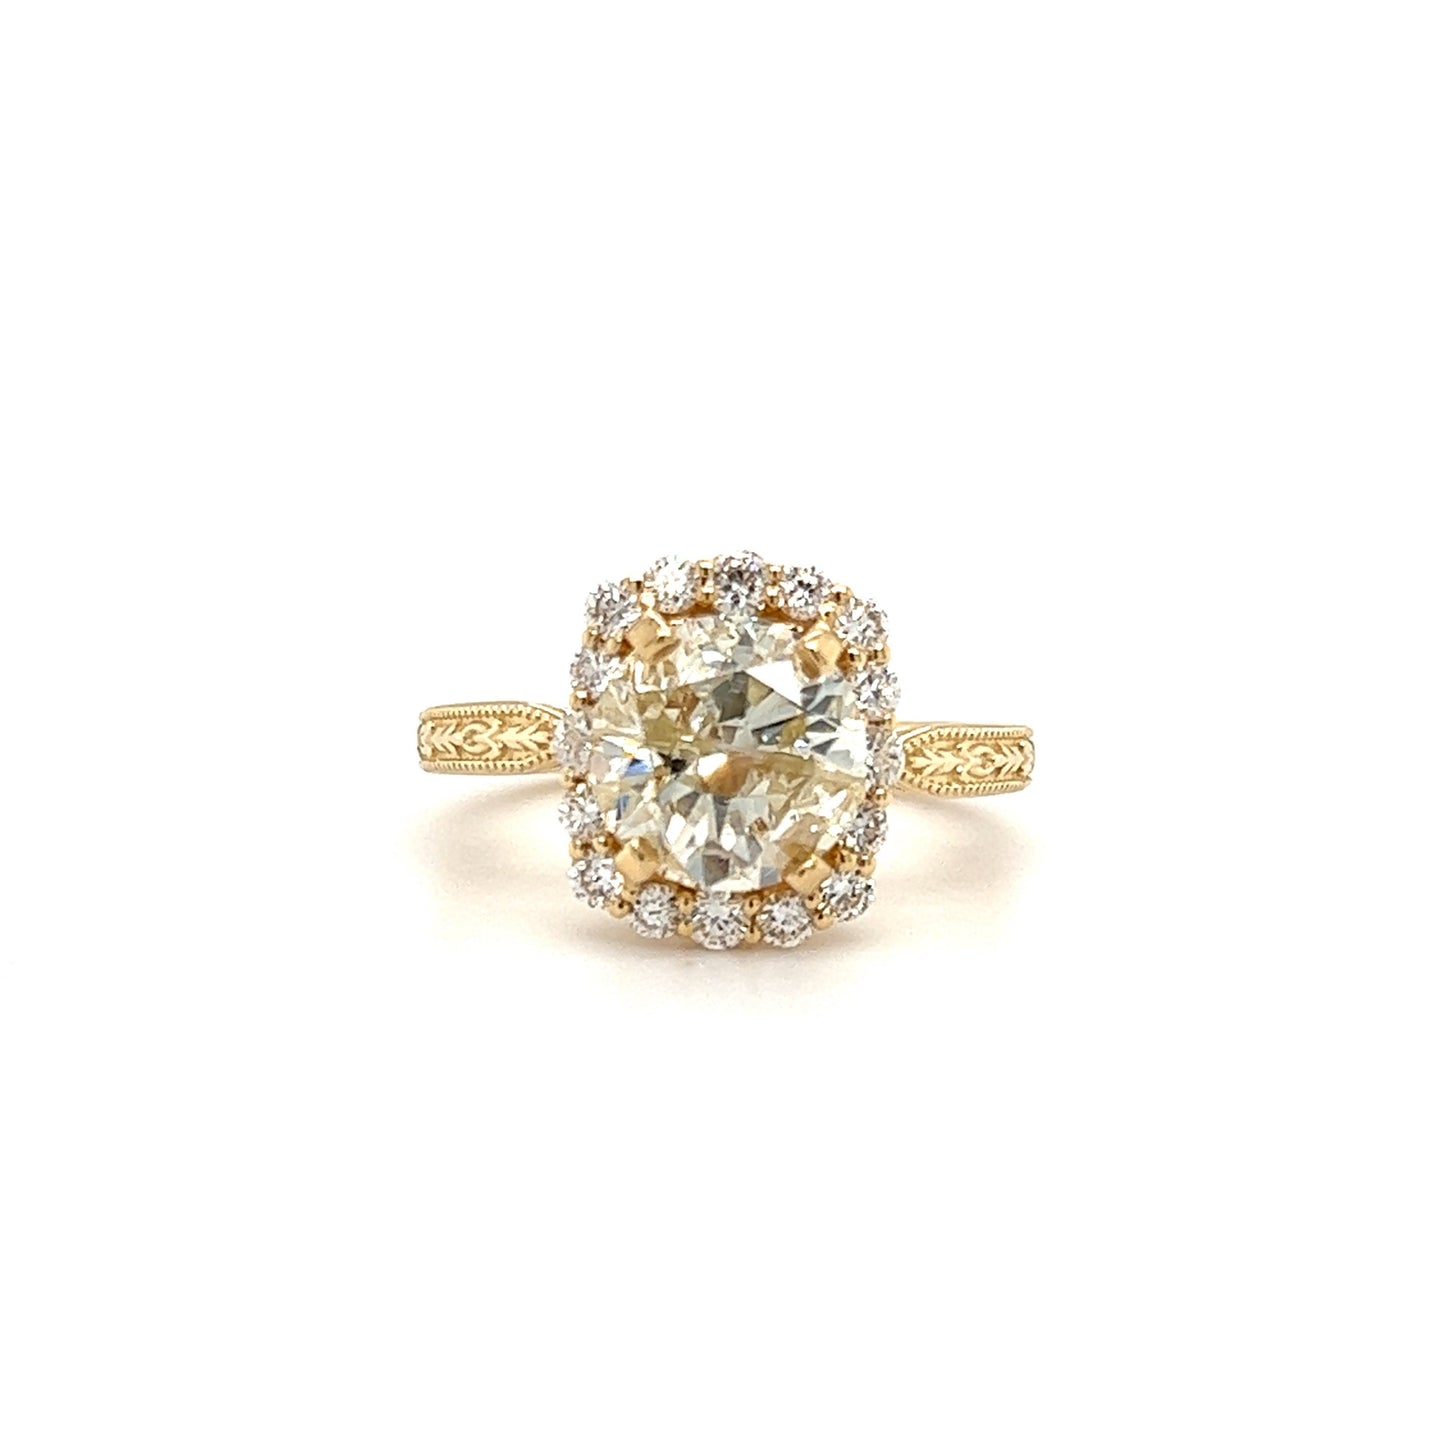 Round Diamond 2.68ct Ring with Diamond Halo in 18K and 14K Yellow Gold Front View